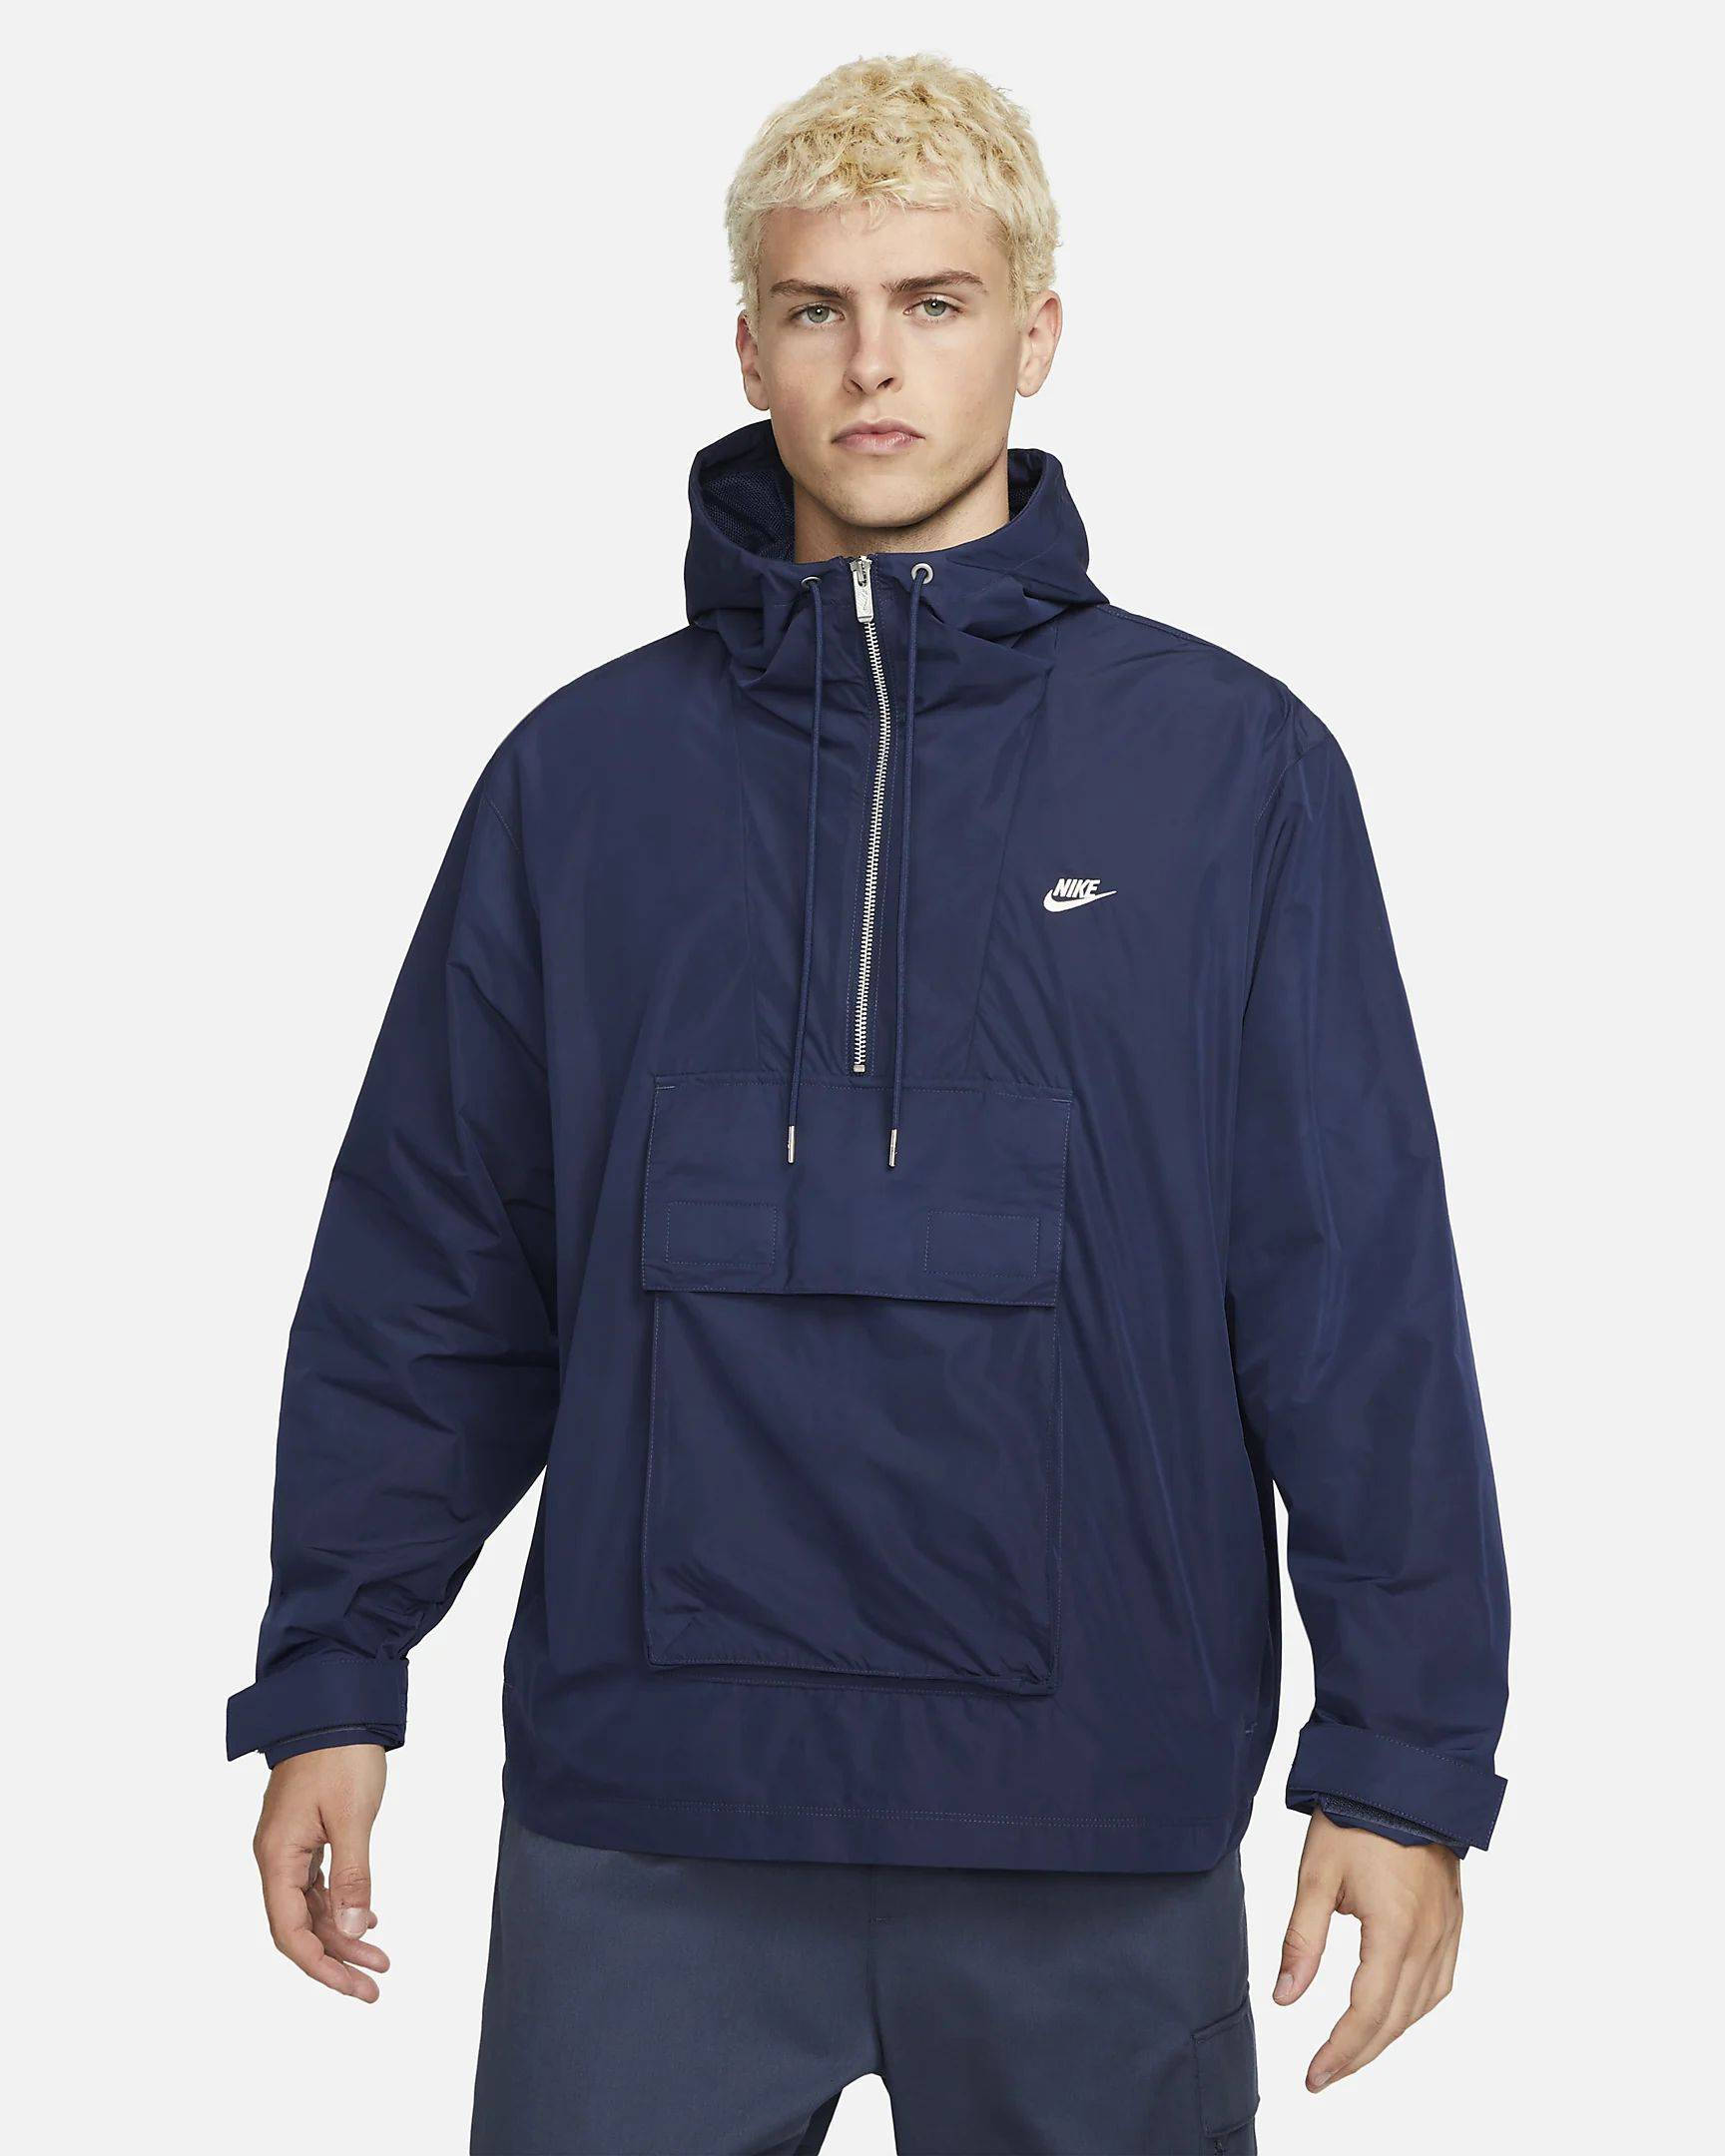 Nike Sportswear Circa Lined Anorak - Midnight Navy | The Sole Supplier